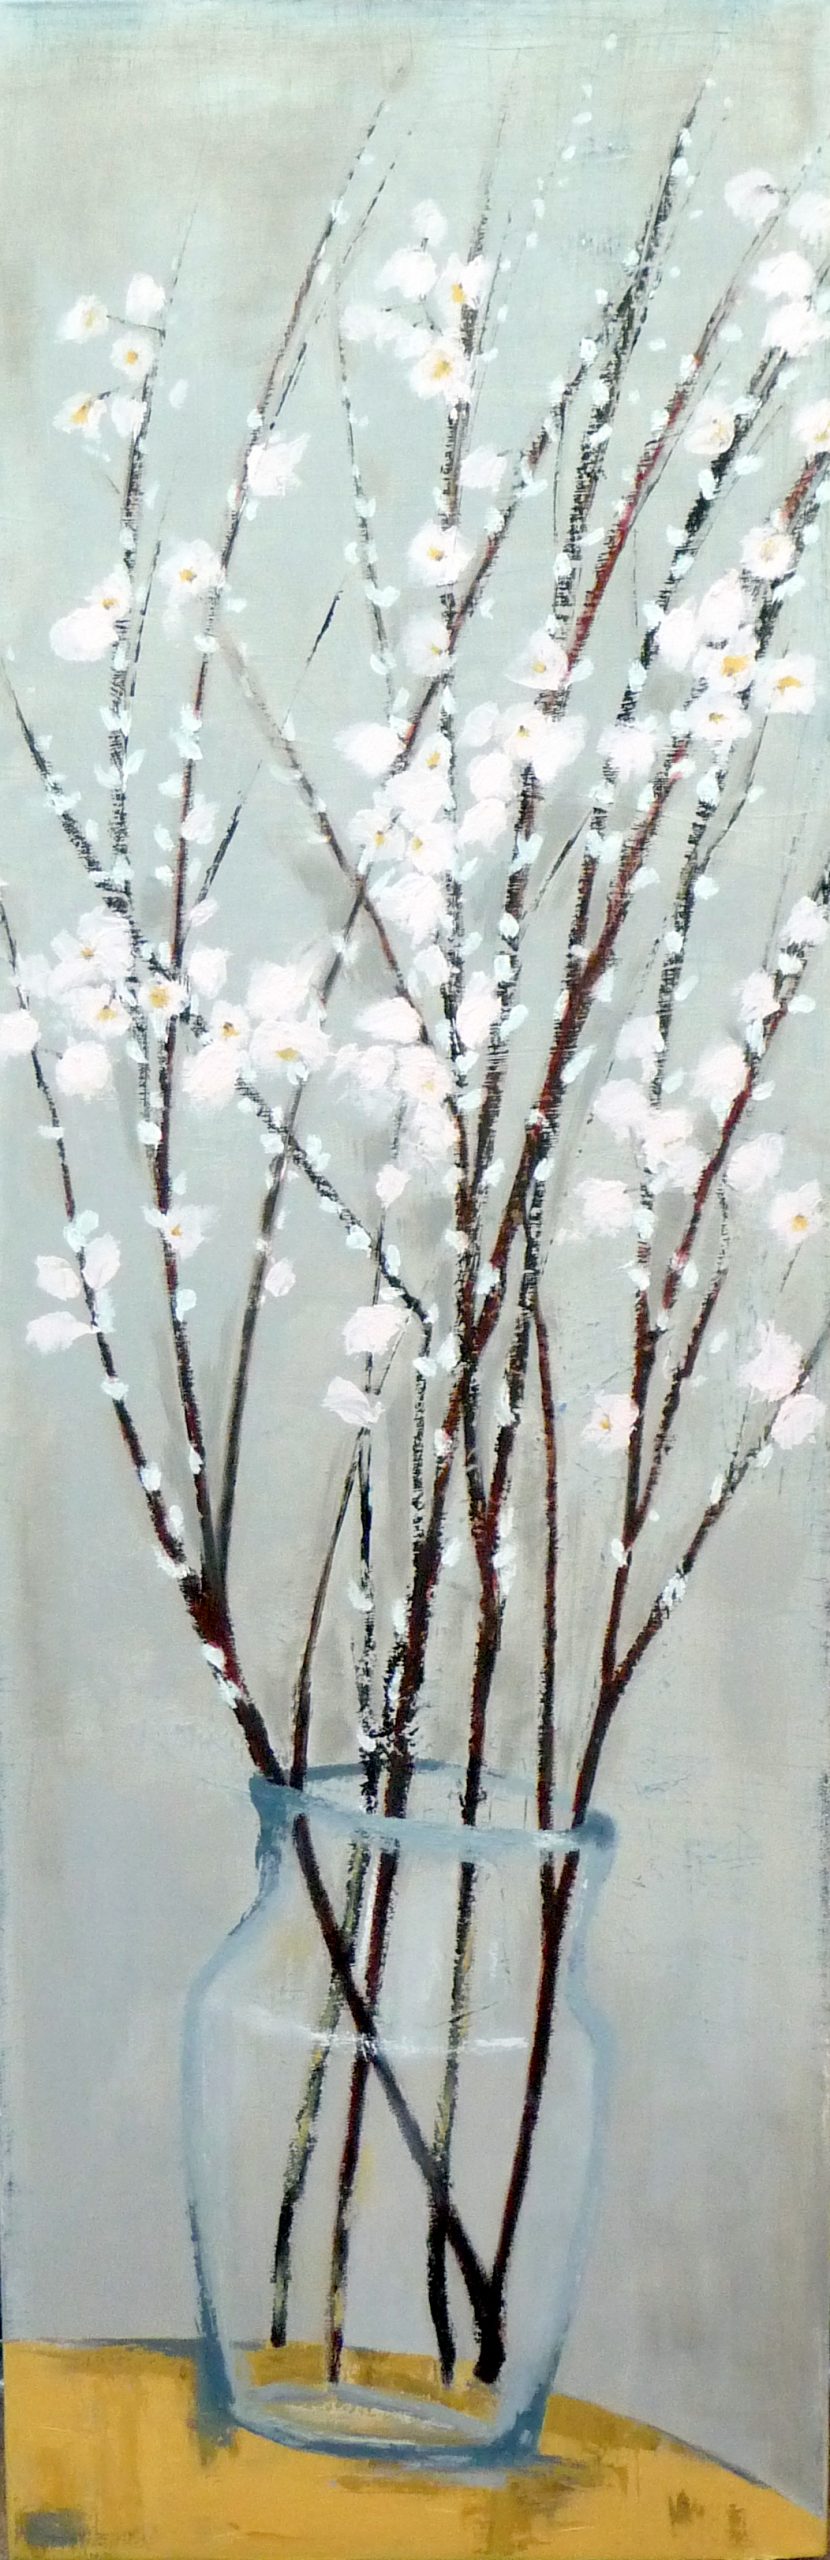 Willow in glass vase (oil on deep edge canvas, 90 x 30cms, unframed)